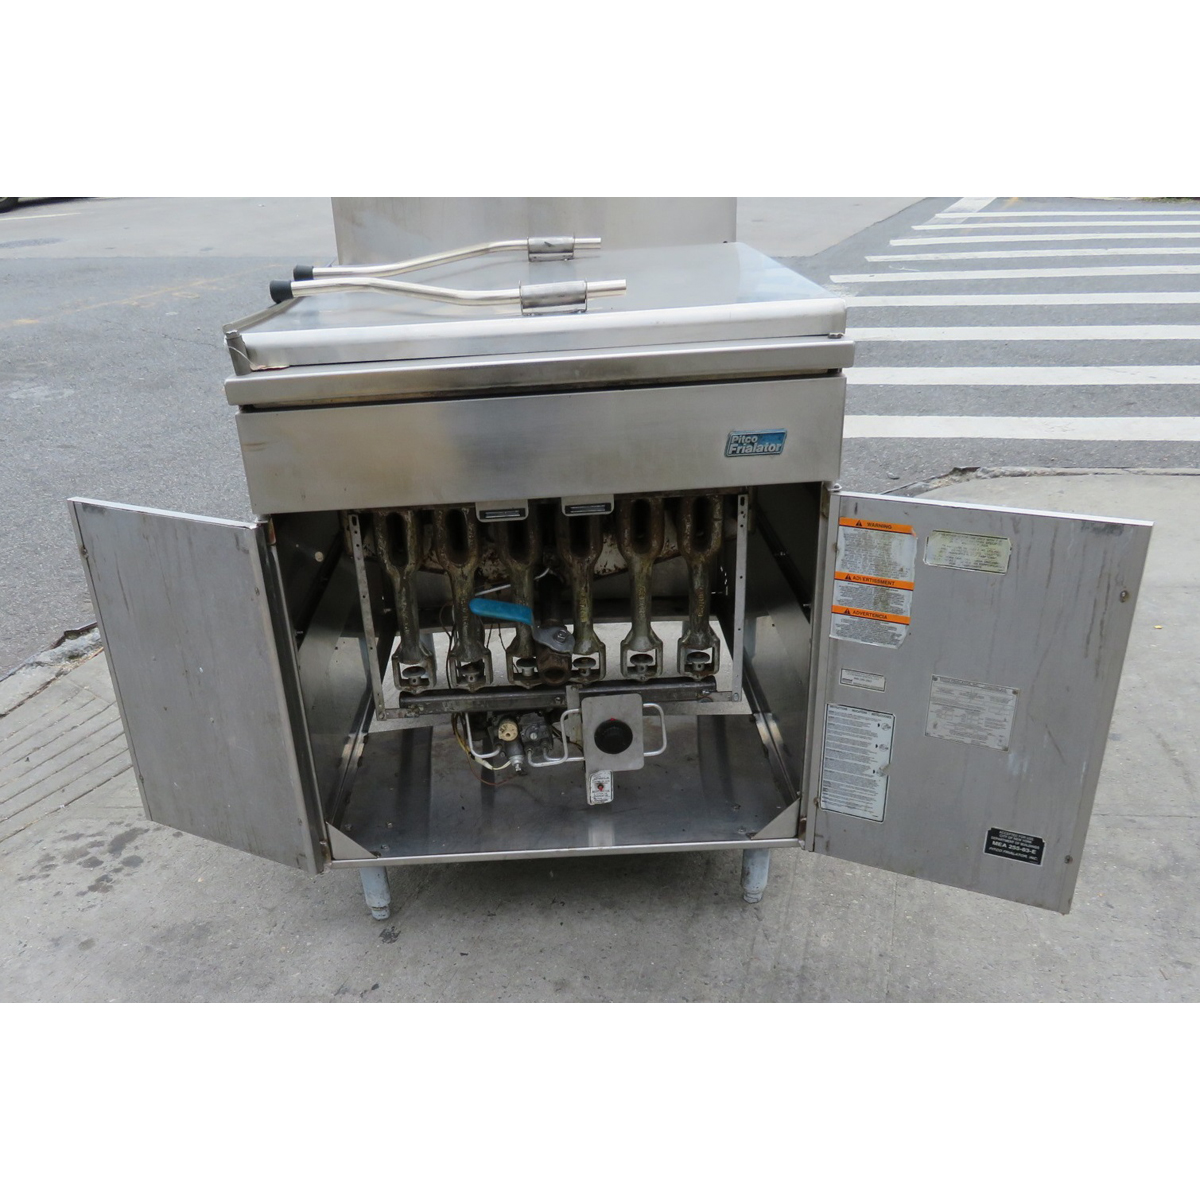 Pitco 24P Natural Gas Donut Fryer, Used Great Condition image 3